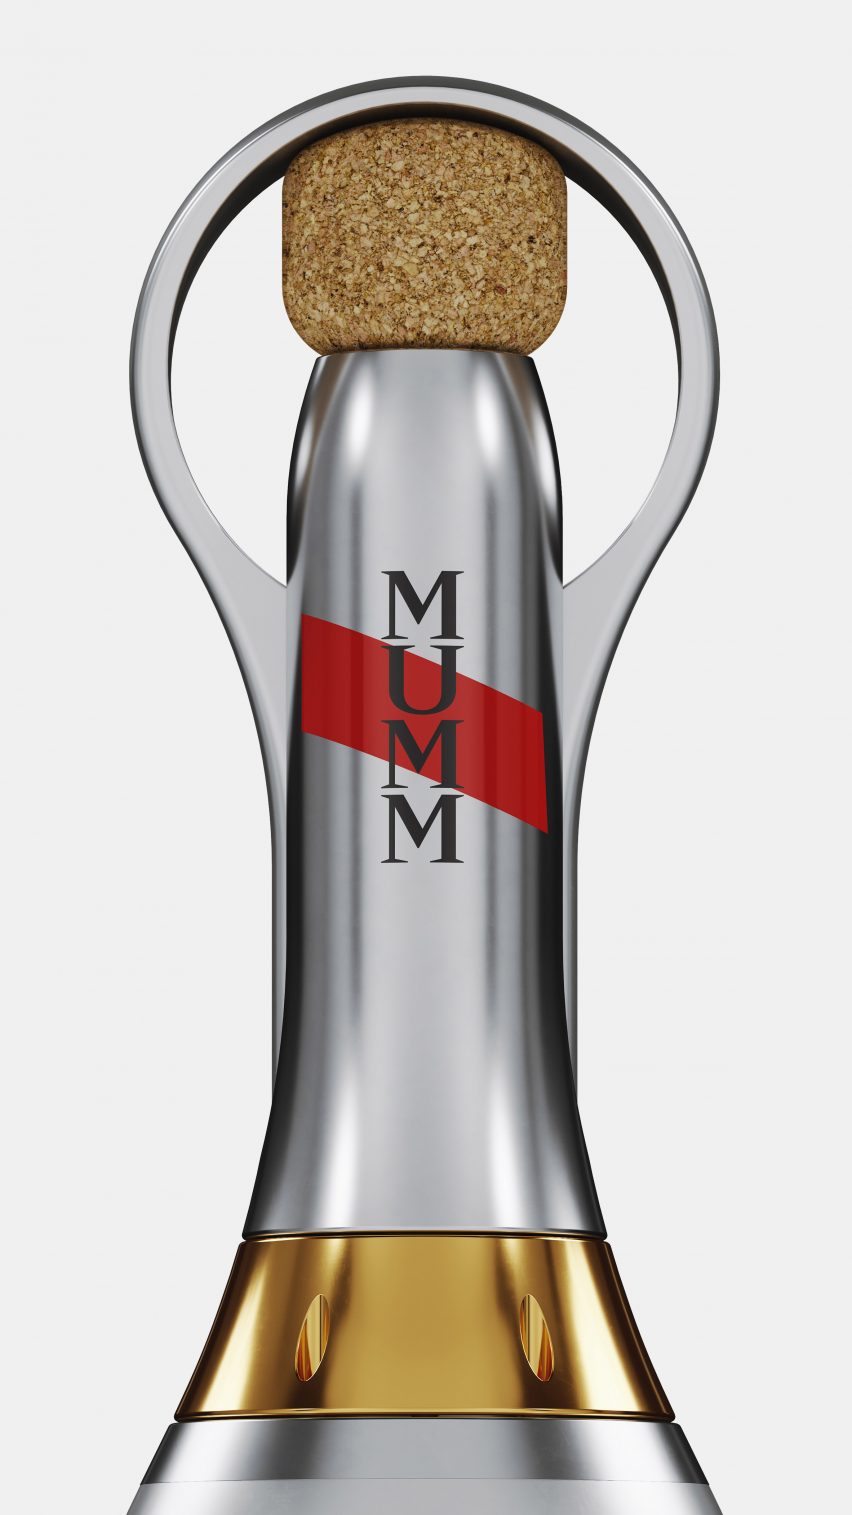 Champagne bottle in aluminium with ring over cork